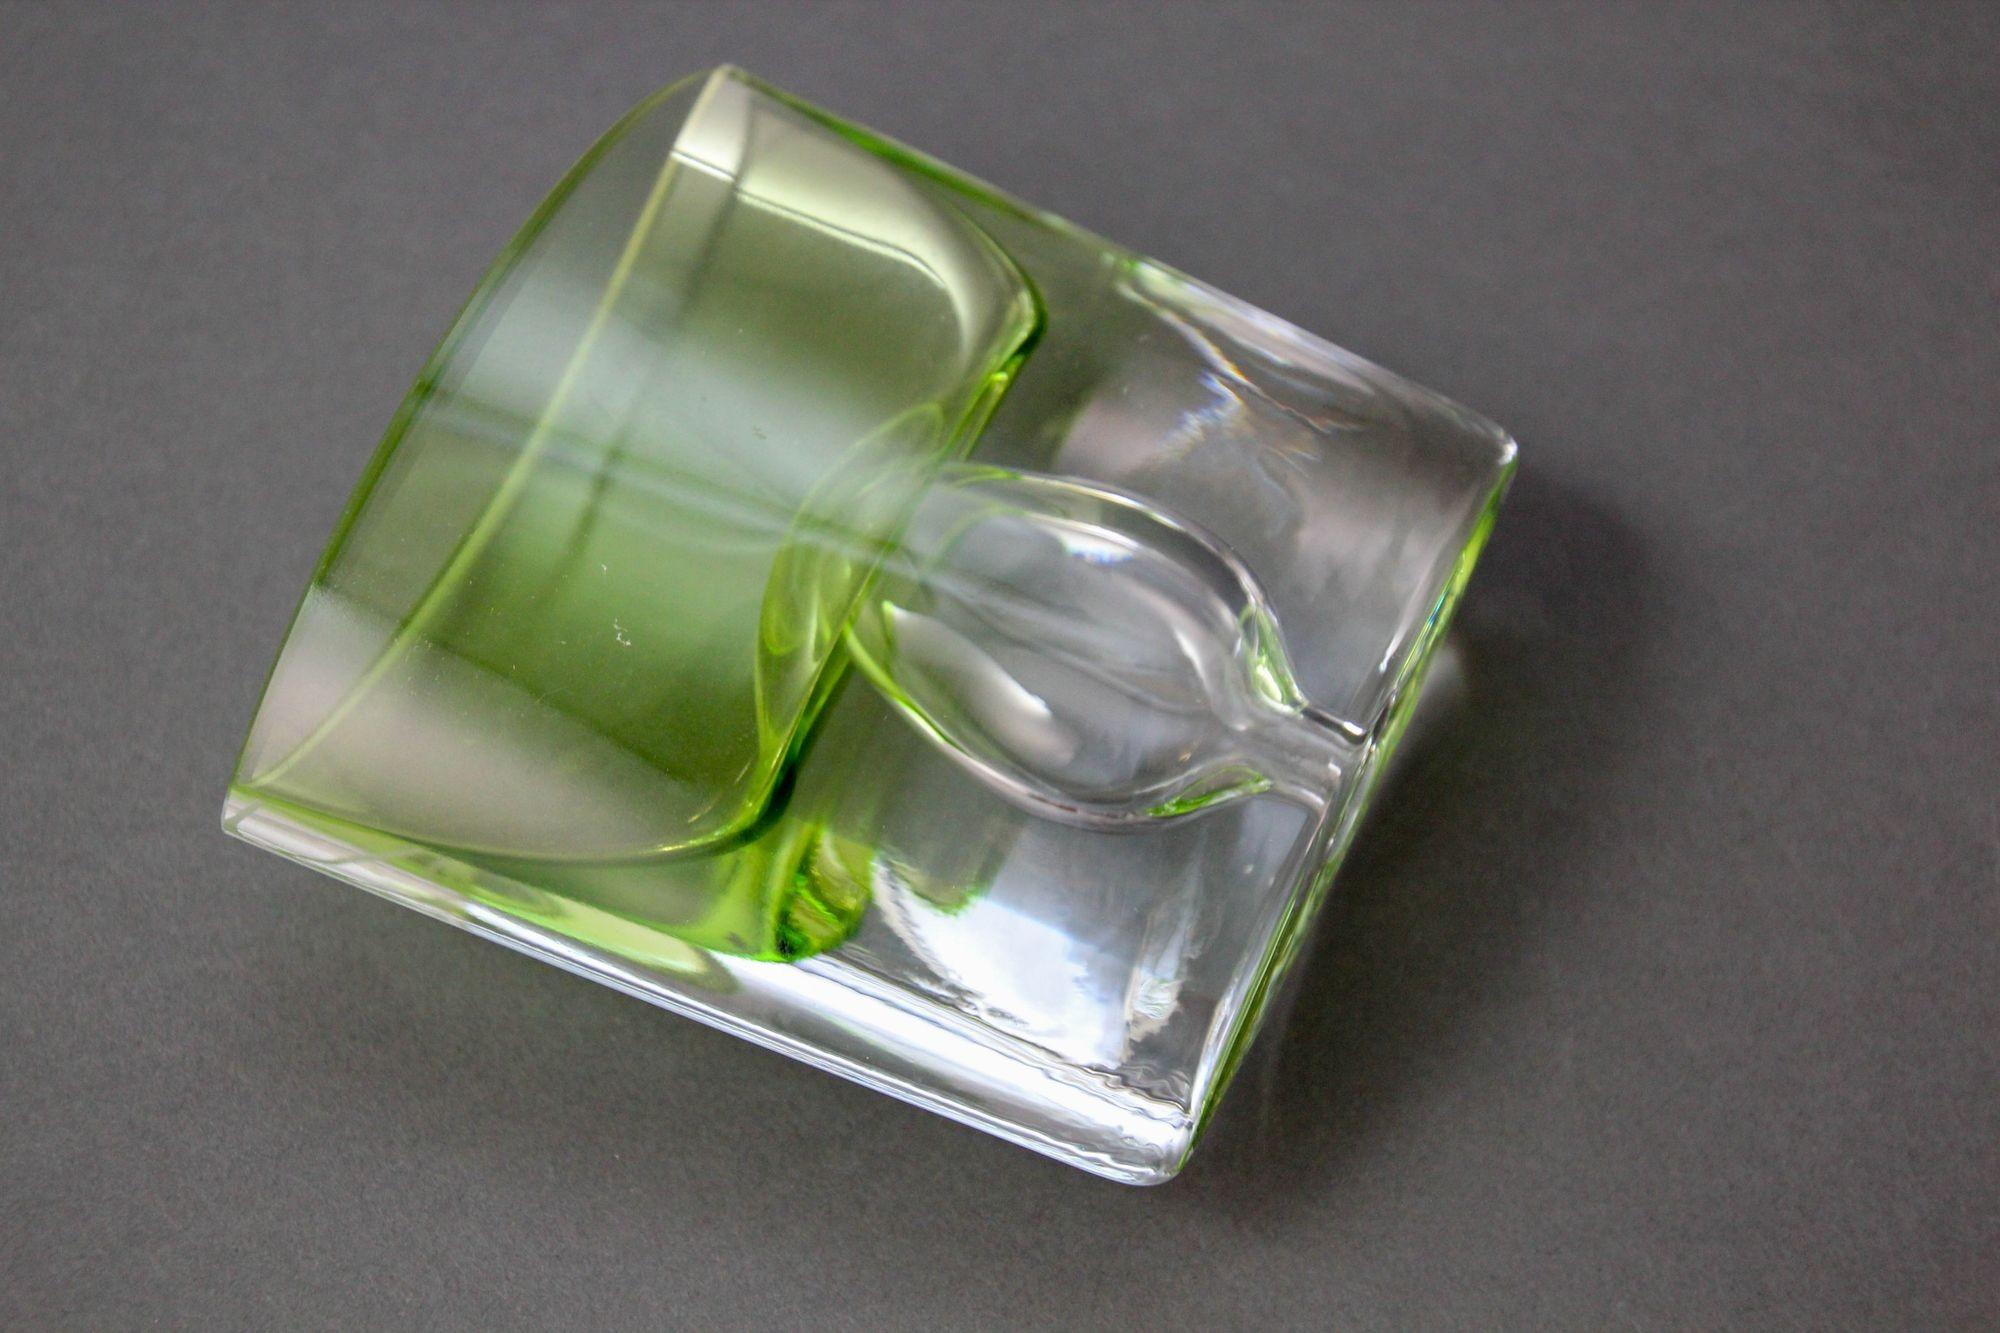 This Krosno Poland vintage green glass bud vase or candle holder with its beautiful shape will easily catch your eye, making it the perfect addition to any decor or living space.
Very stylish and flamboyant, sleek crystal green glass with a heavy